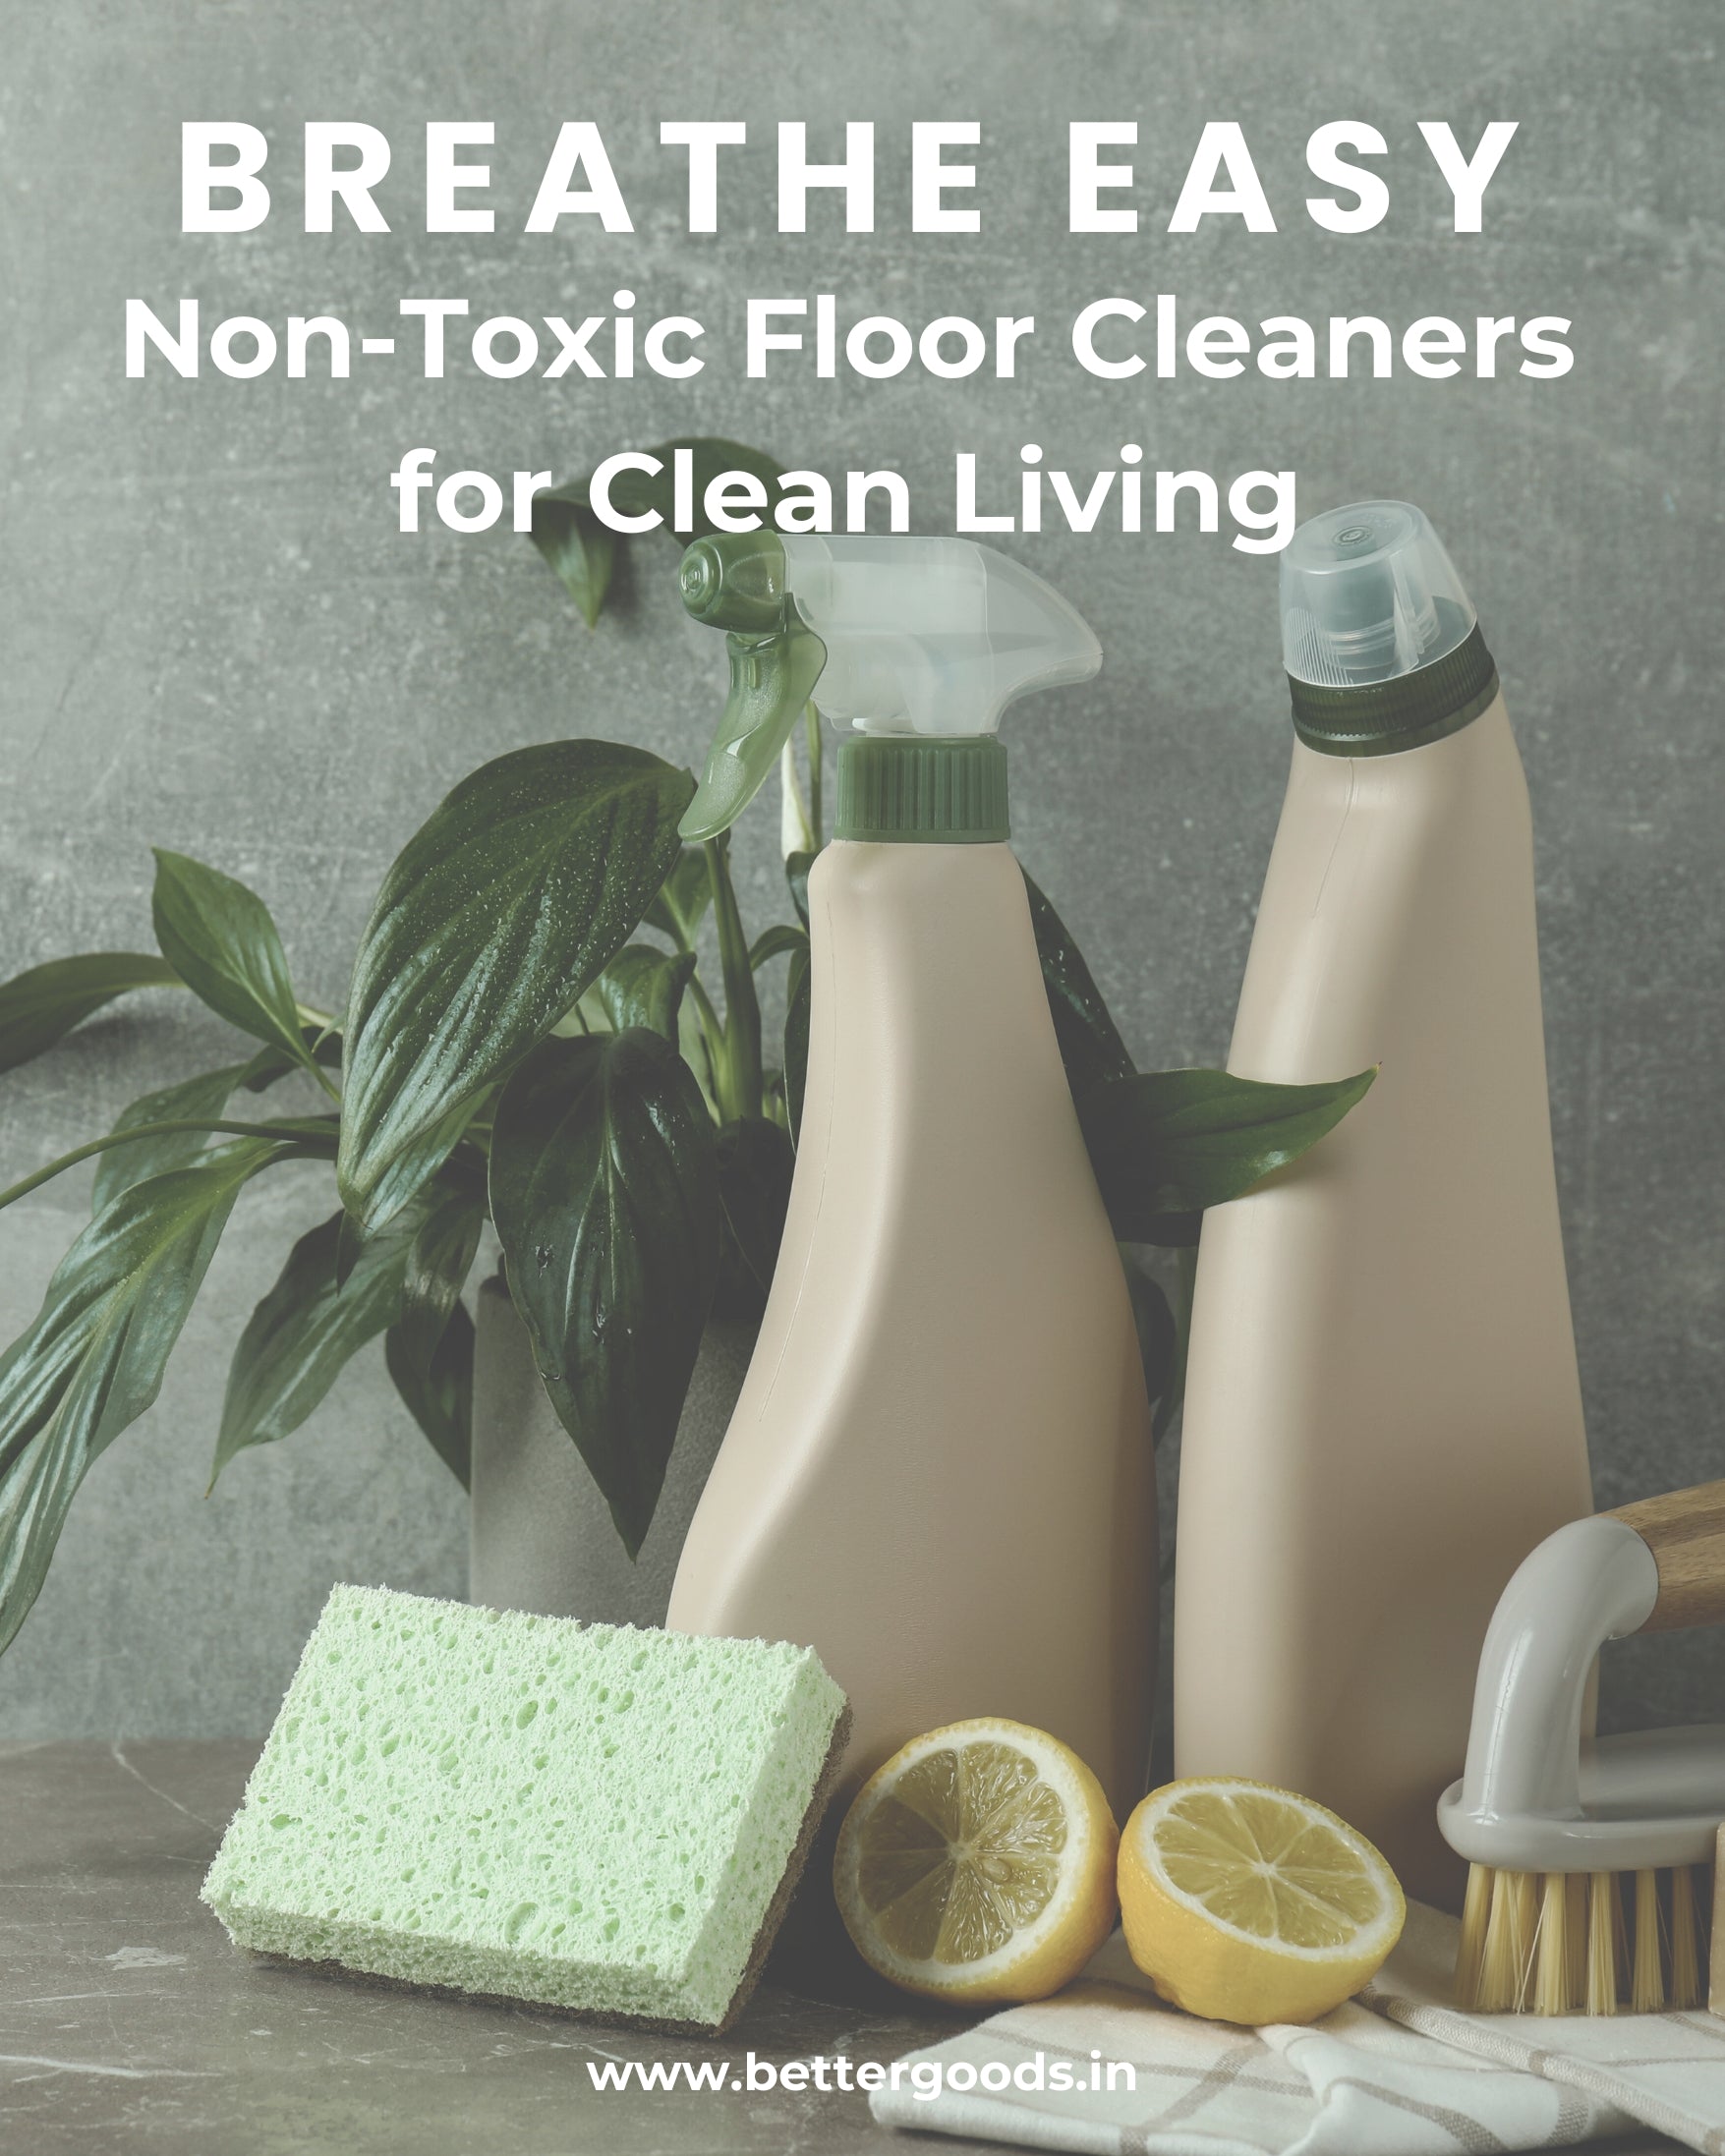 A Guide to Non-Toxic Floor Cleaners - All Biodegradable and Pet Safe Options